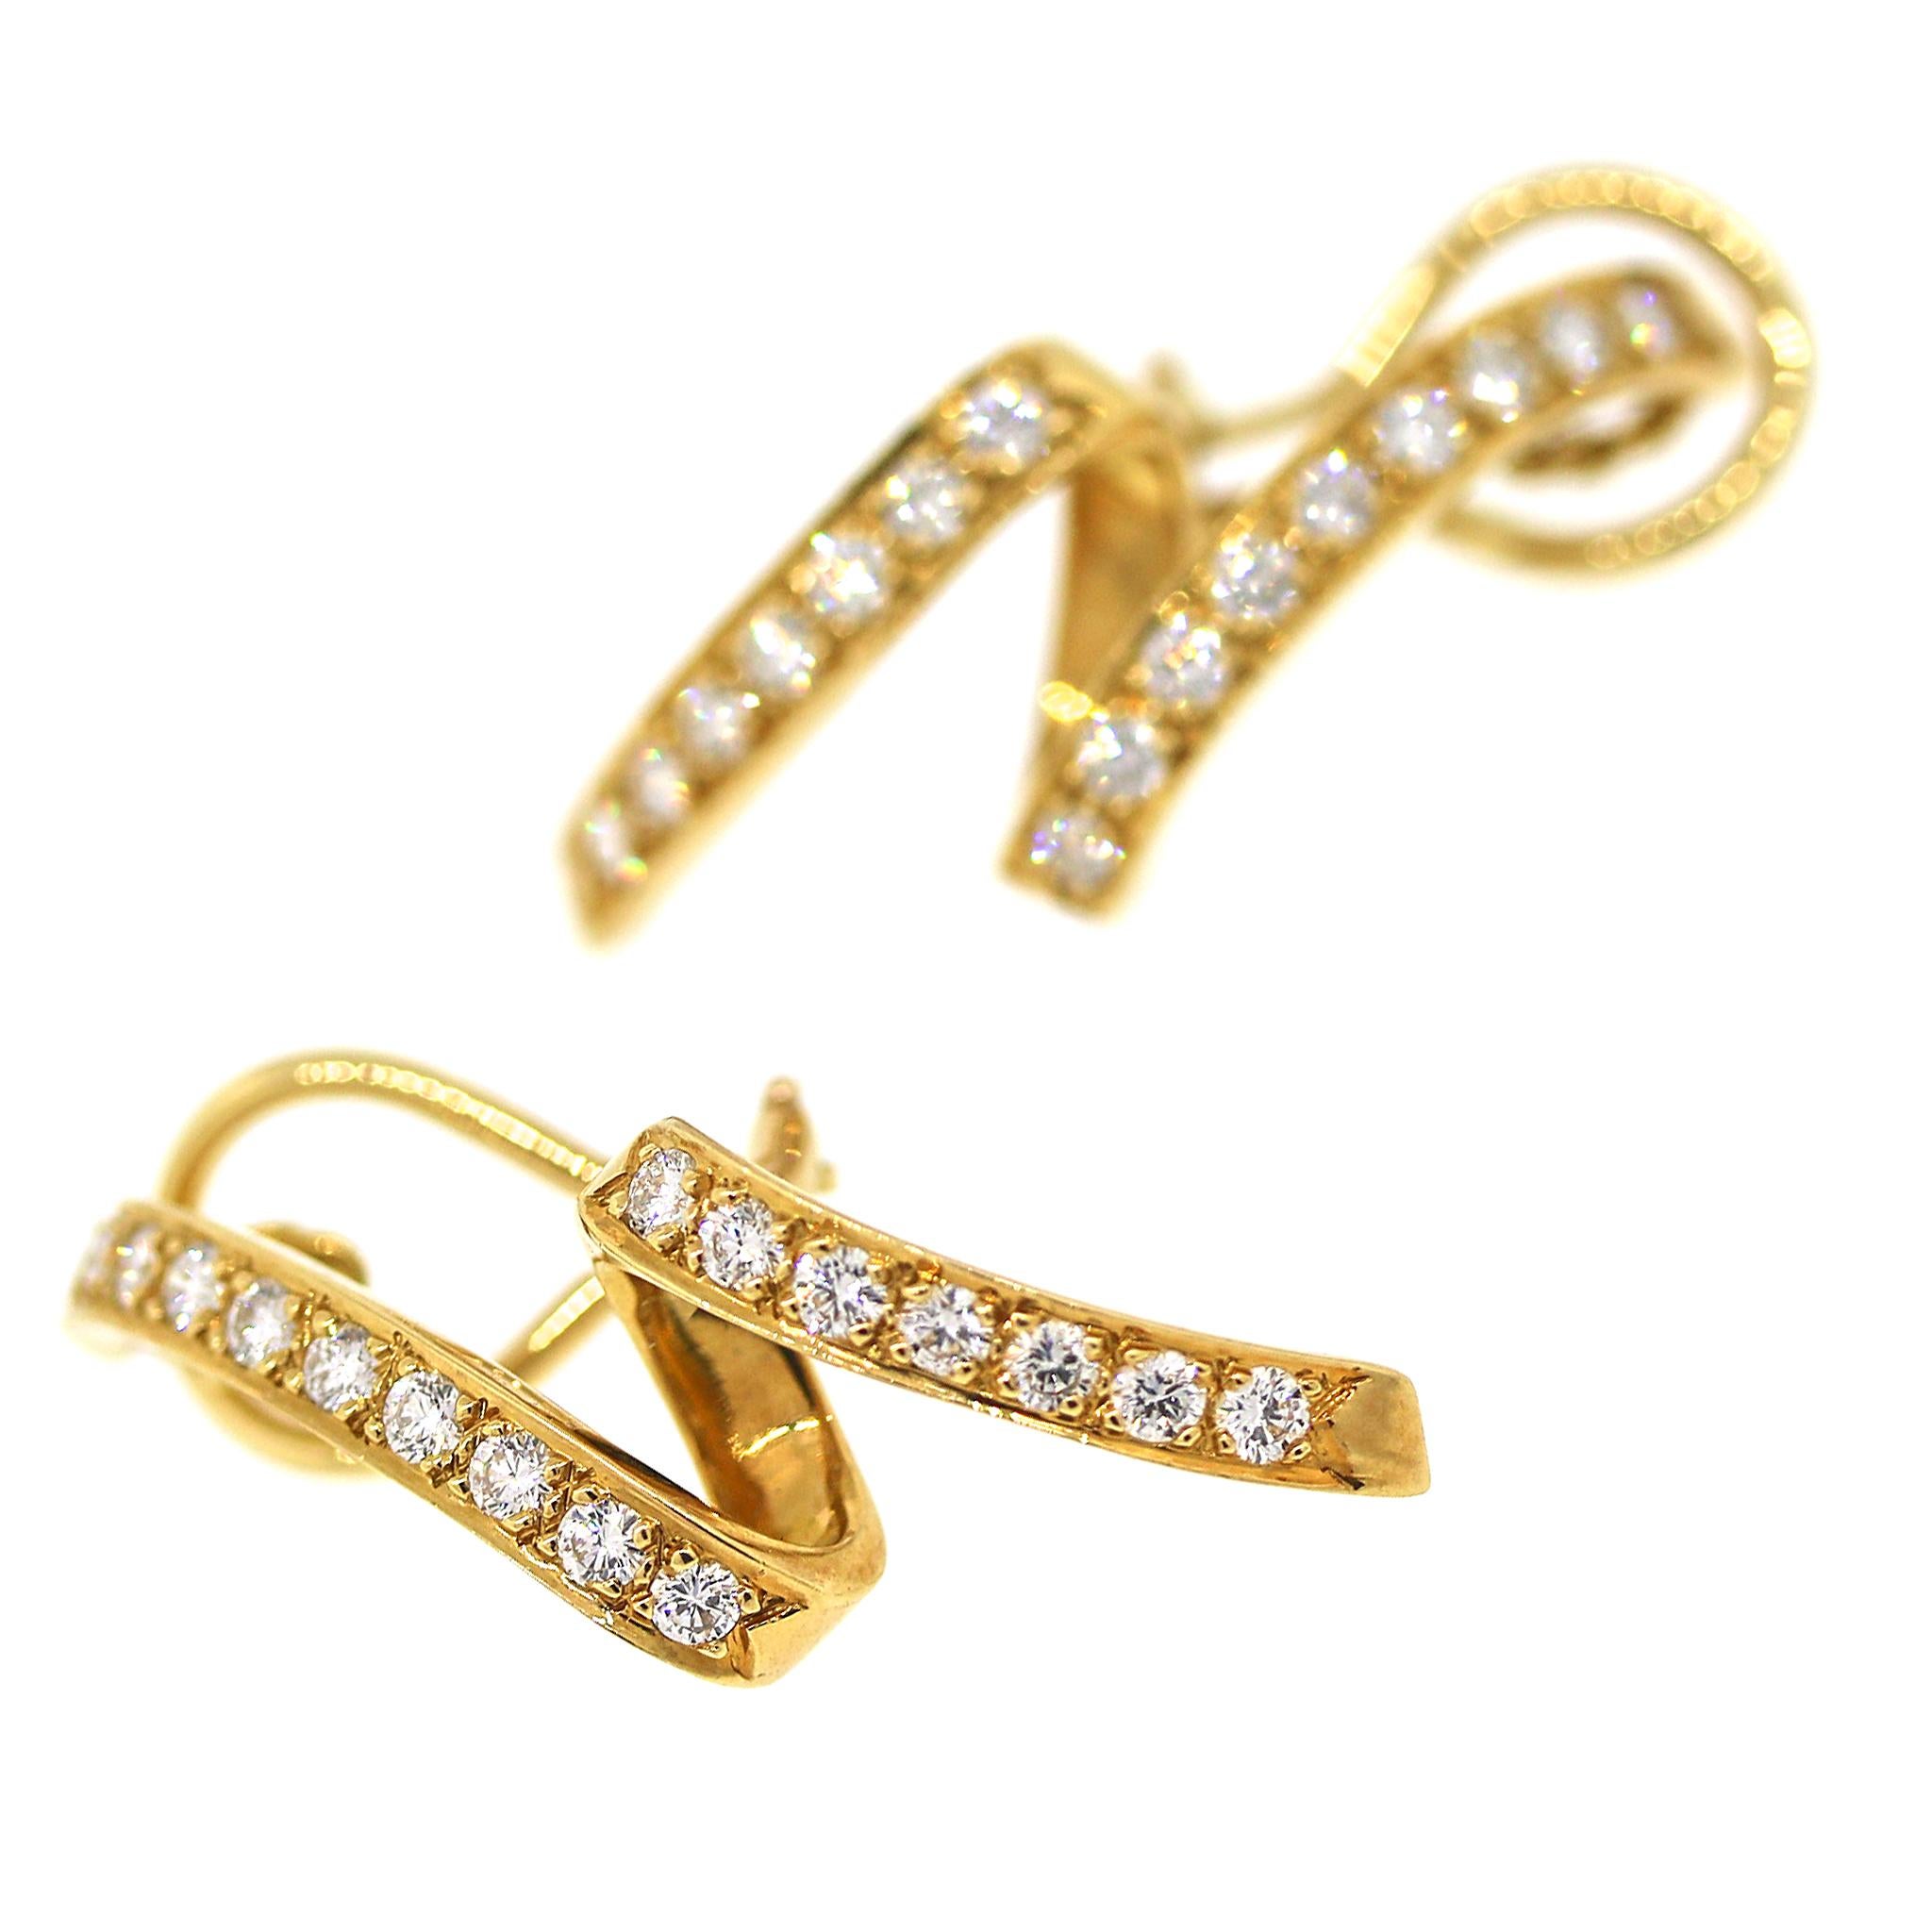 Round Cut 1.05 carats Diamond Swirl Earrings in Yellow Gold For Sale